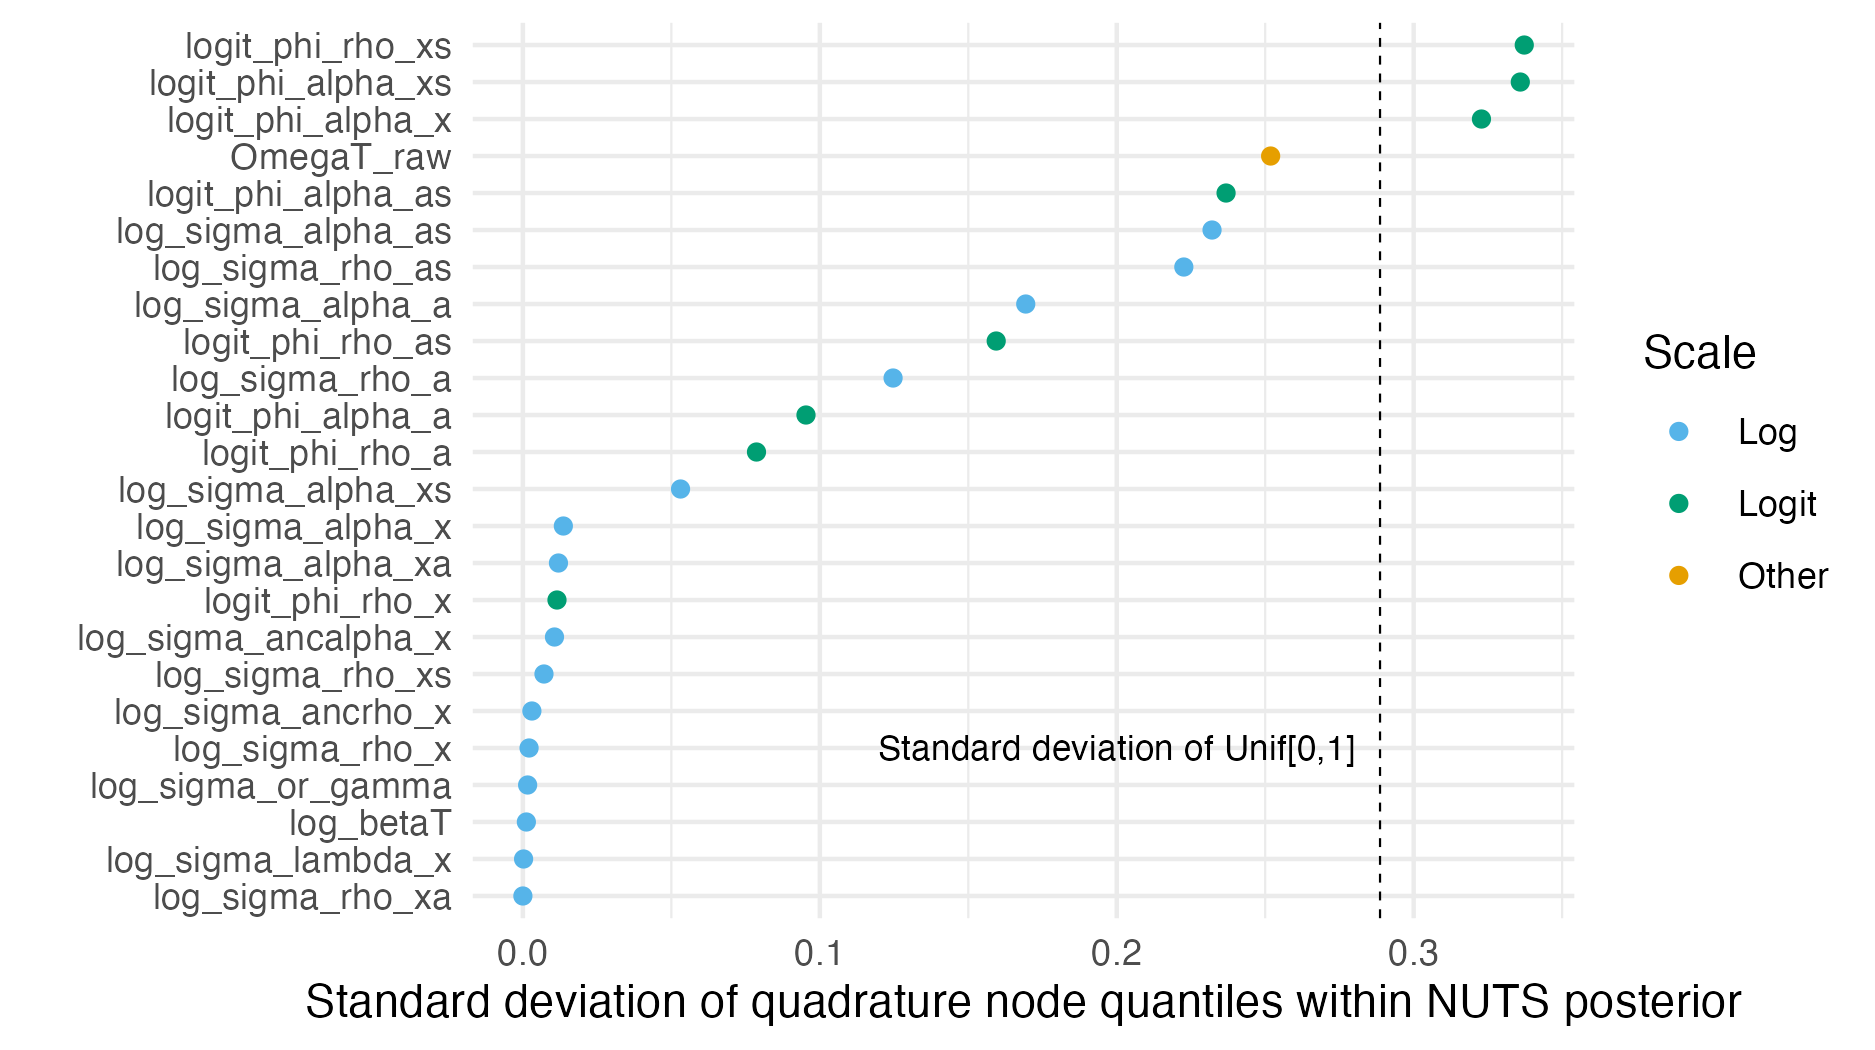 The standard deviation of the quadrature nodes can be used as a measure of coverage of the posterior marginal distribution. Nodes spaced evenly within the marginal distribution would be expected to uniformly distributed quantile, corresponding to a standard deviation of 0.2861, shown as a dashed line.